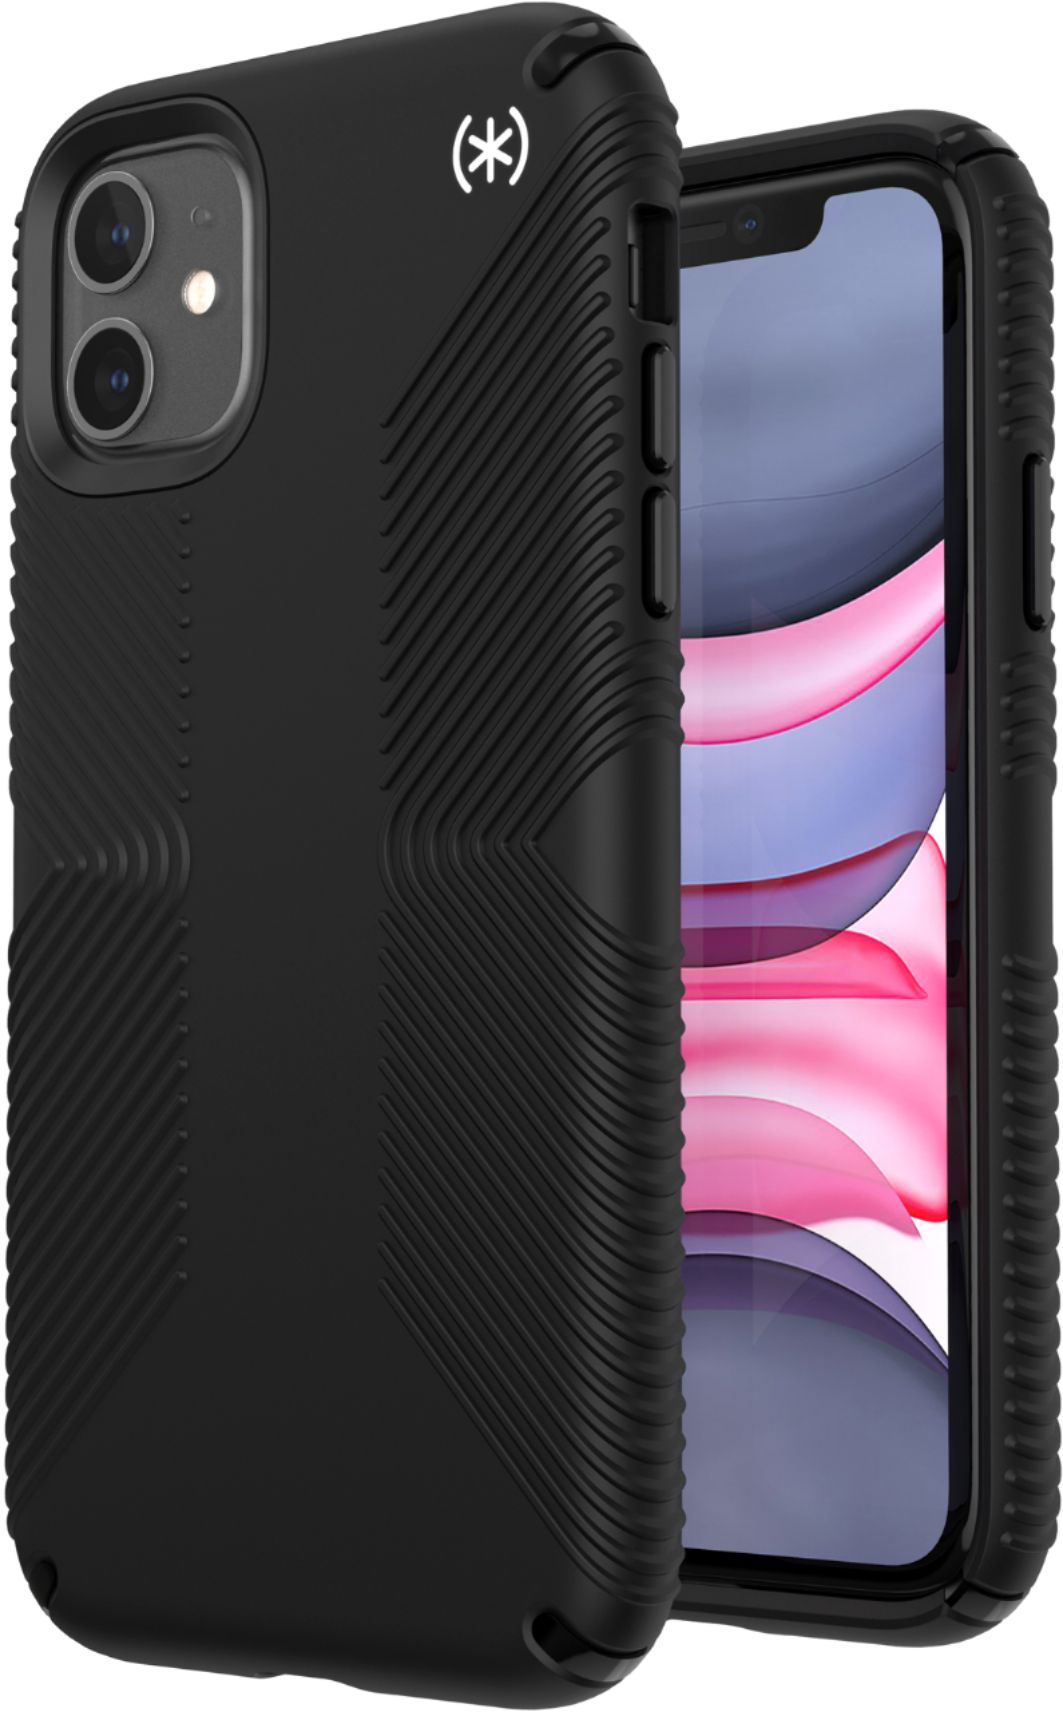 Speck Presidio Wallet Case for iPhone 11 Pro Max 130034-1050 B&H